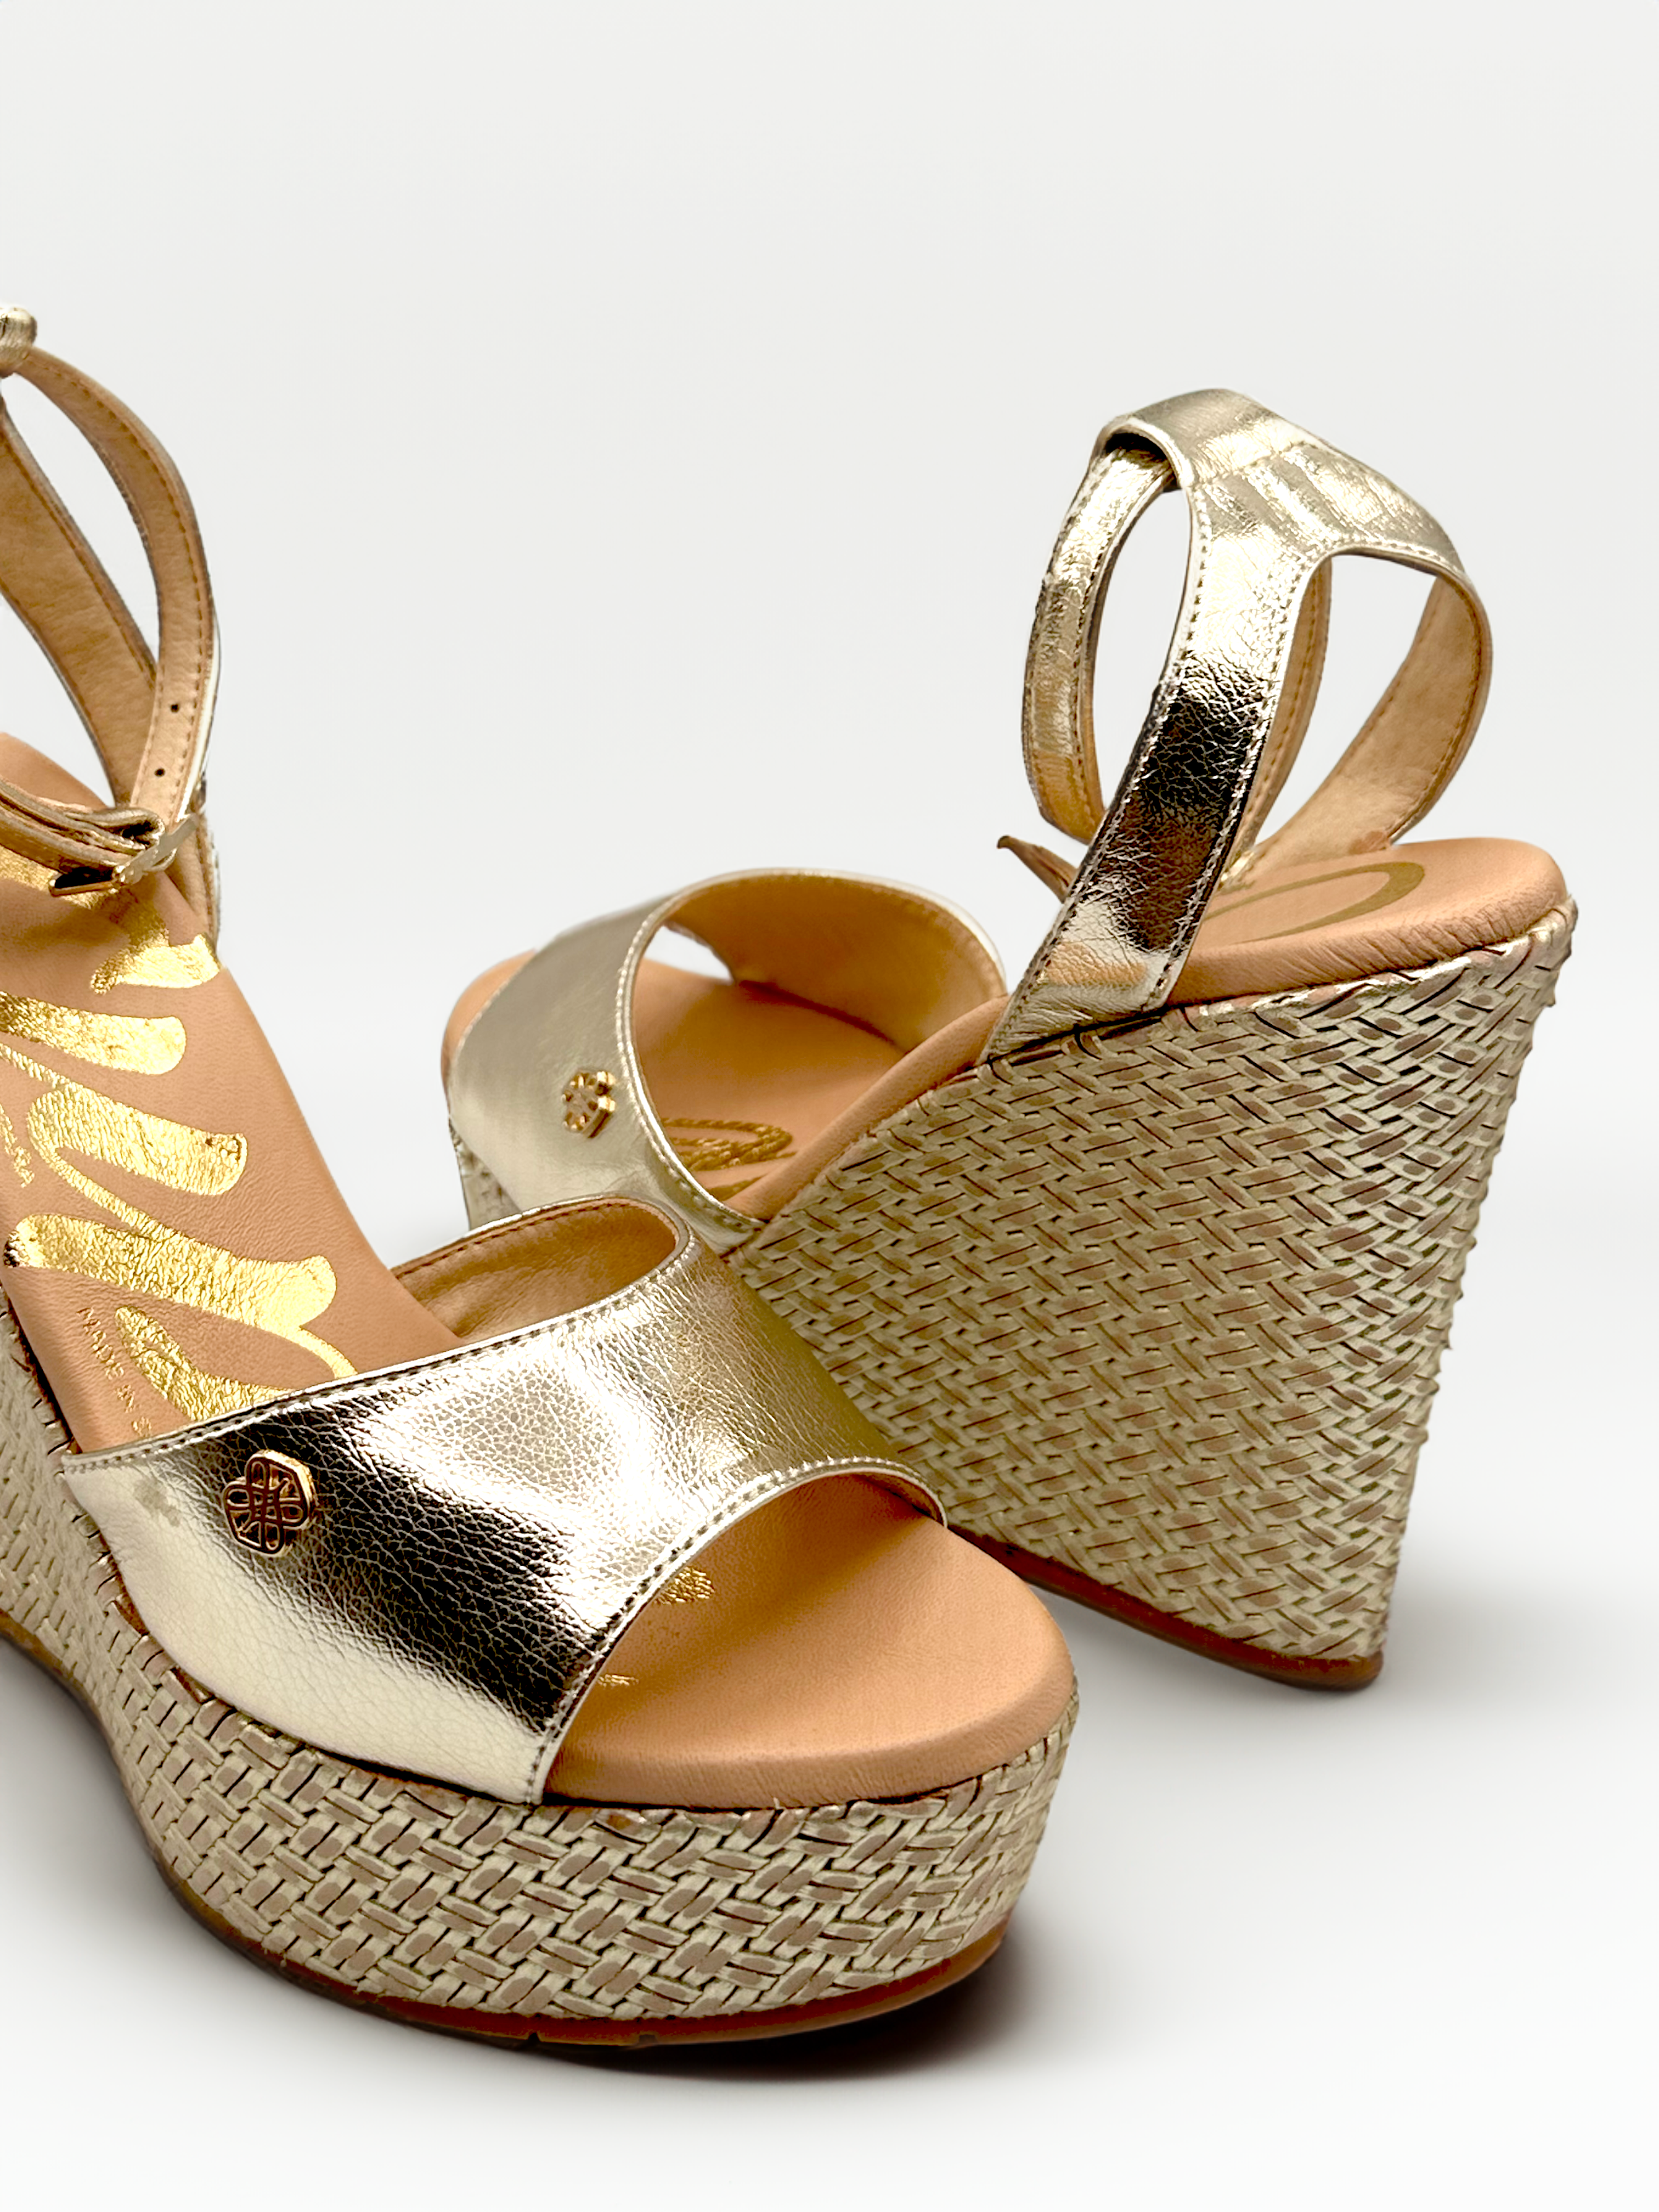 NUR ITALY Cuple Ankle Strap Leather Wedge Sandal, main color, GOLD